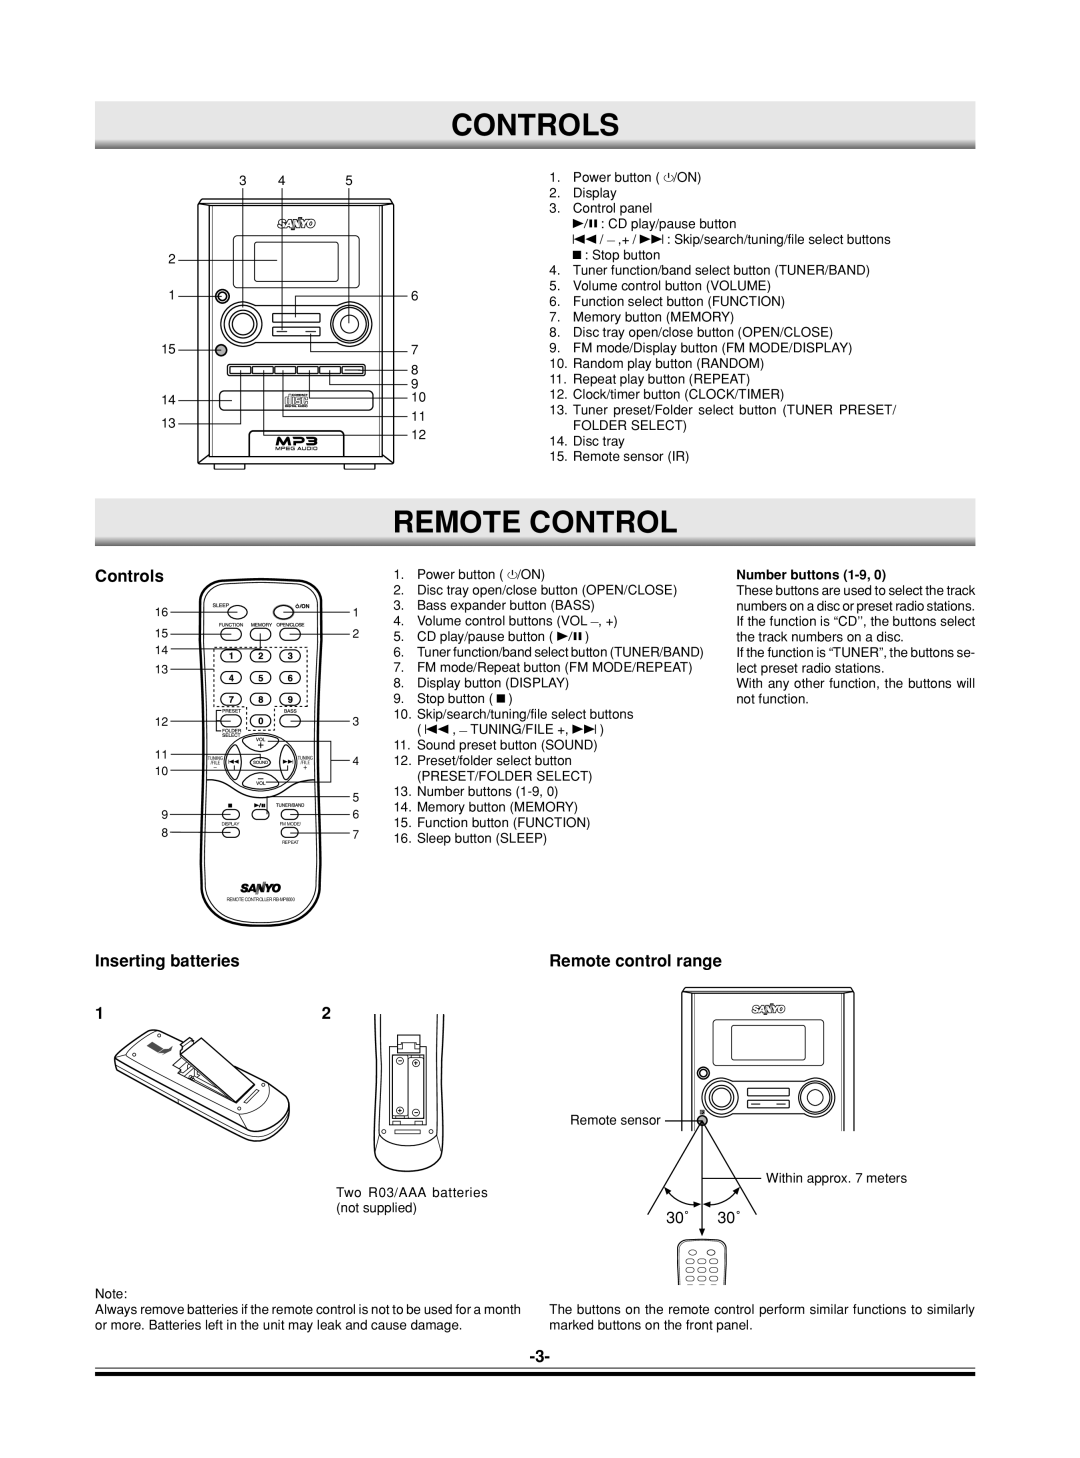 Sanyo DC-MP9500 Controls, Remote Control, Inserting batteries, Remote control range, Number buttons 1-9,0, 30˚ 30˚ 